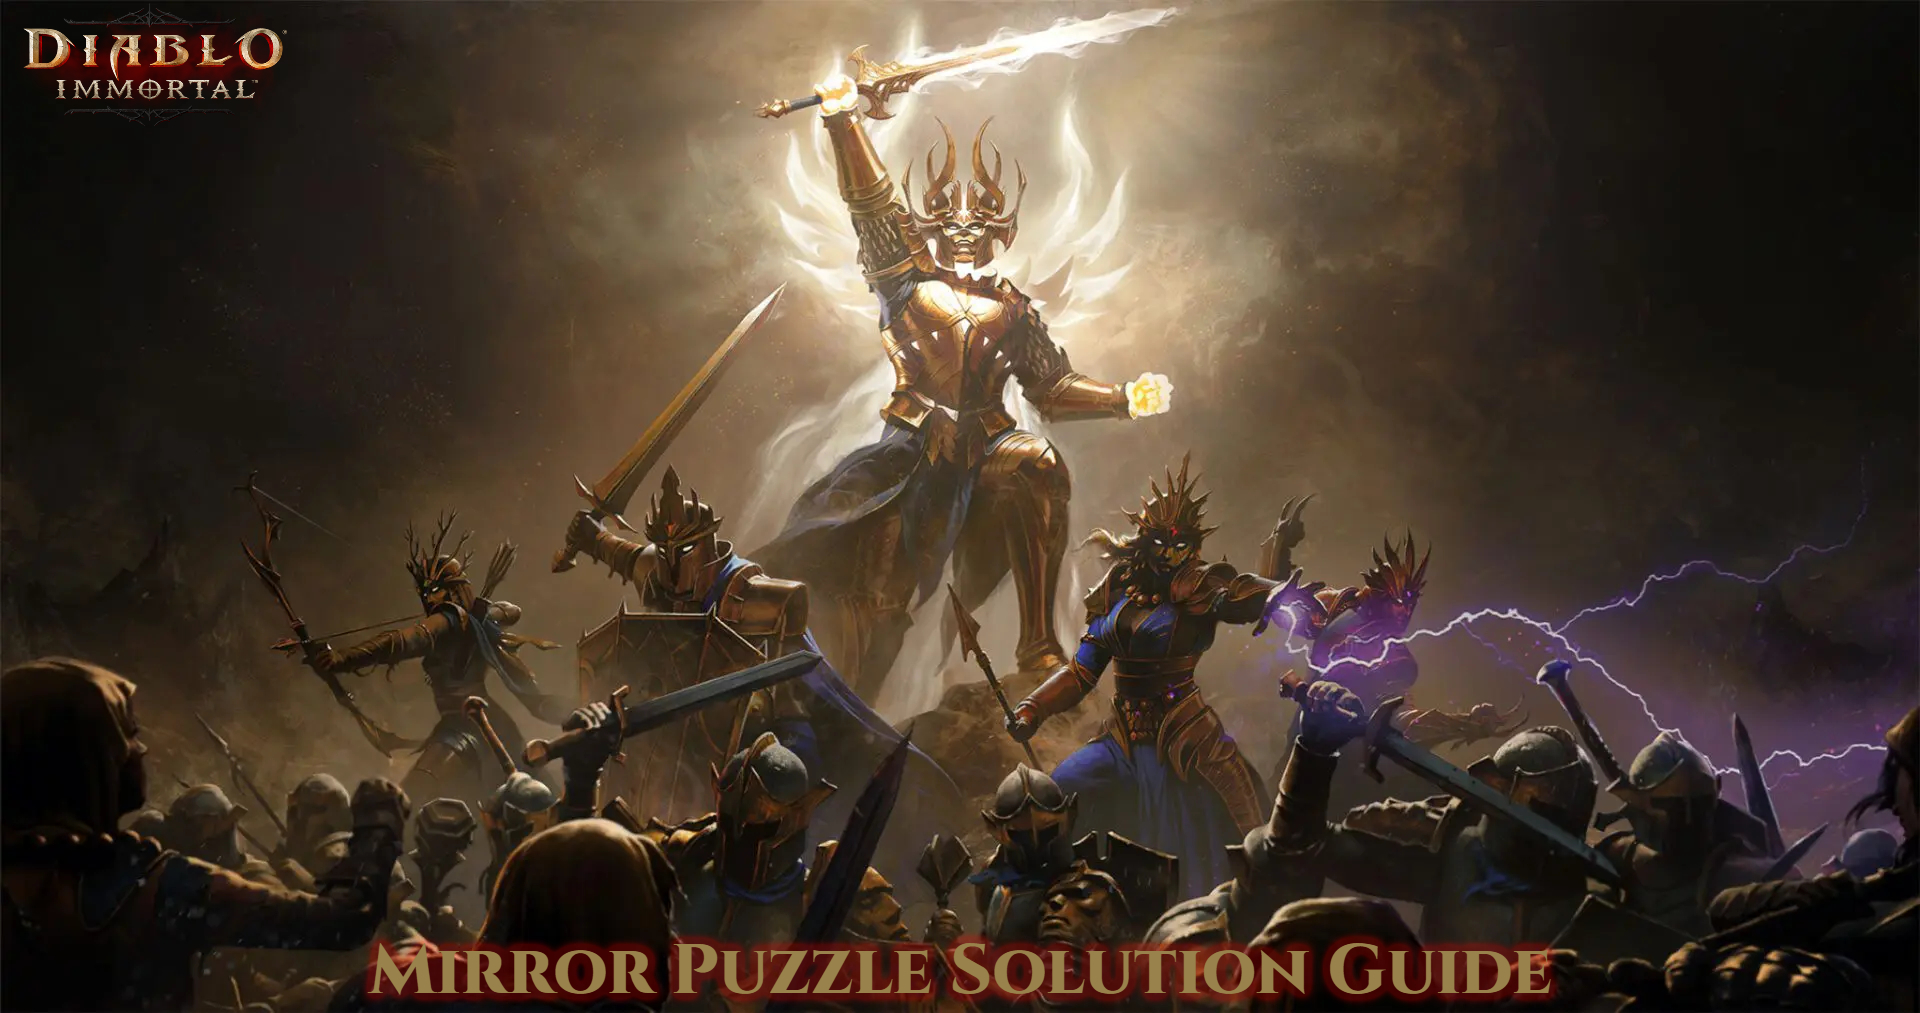 You are currently viewing Mirror Puzzle Solution Guide